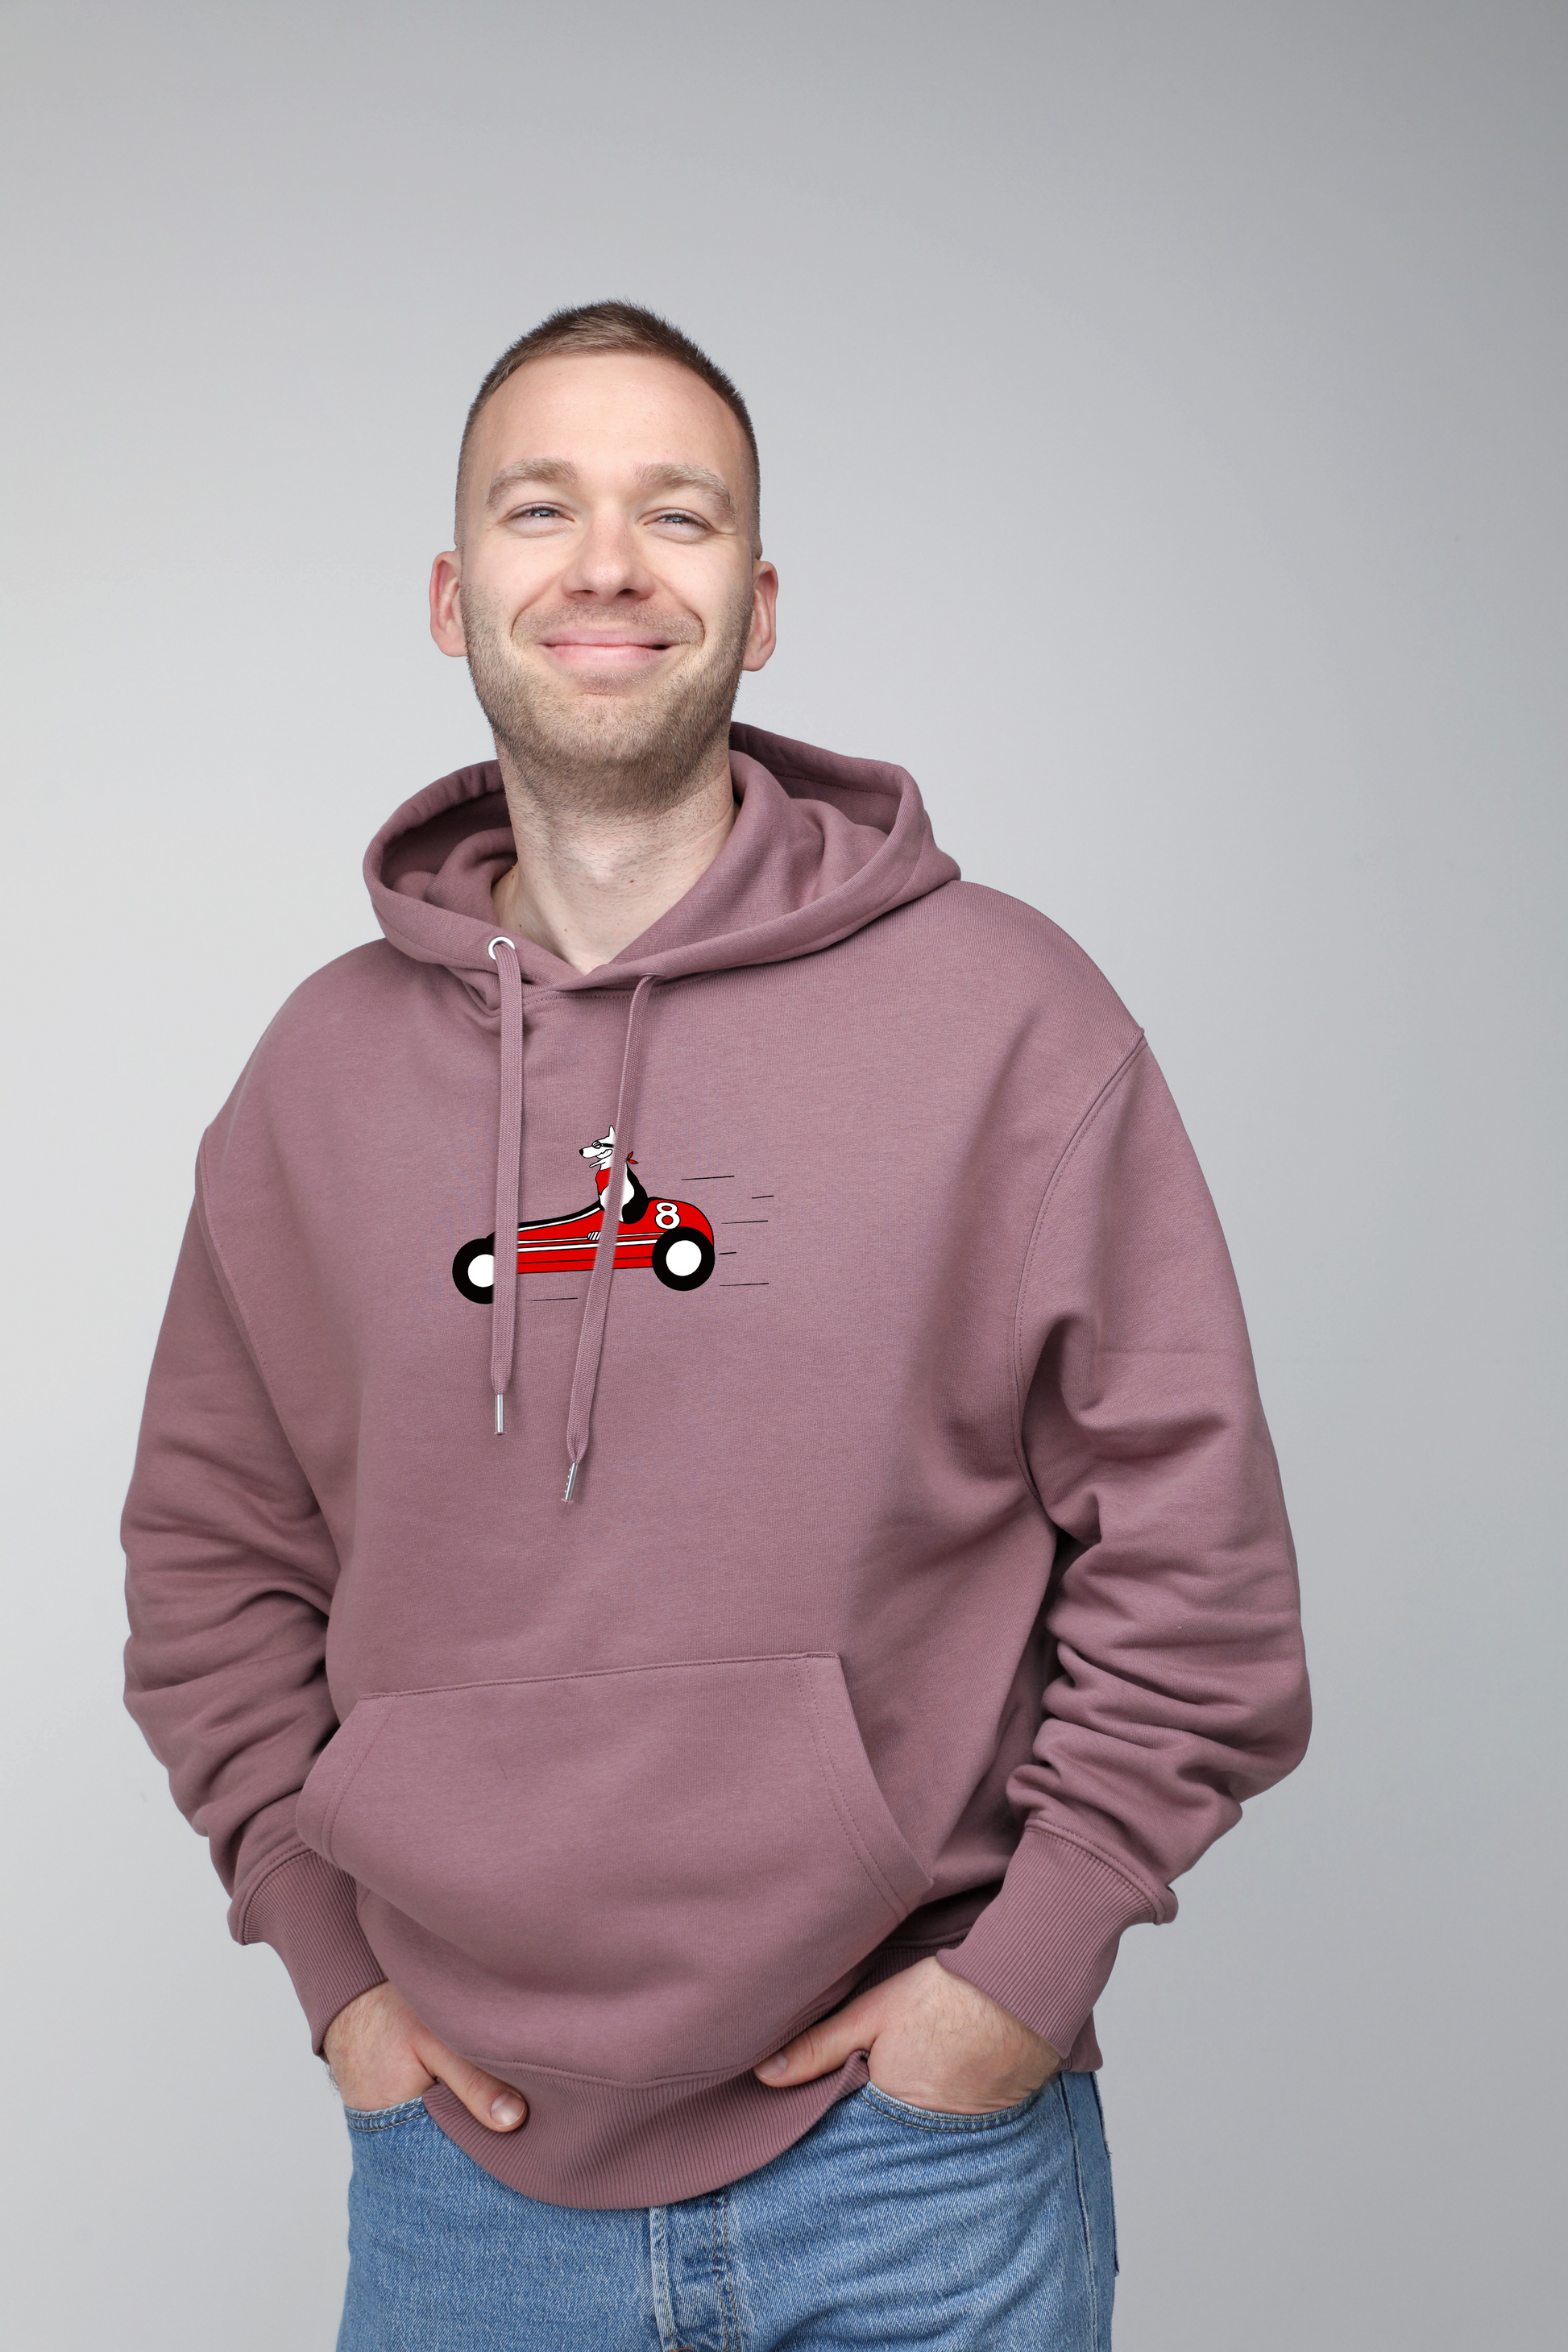 Retro racer dog | Hoodie with dog. Oversize fit | Unisex by My Wild Other